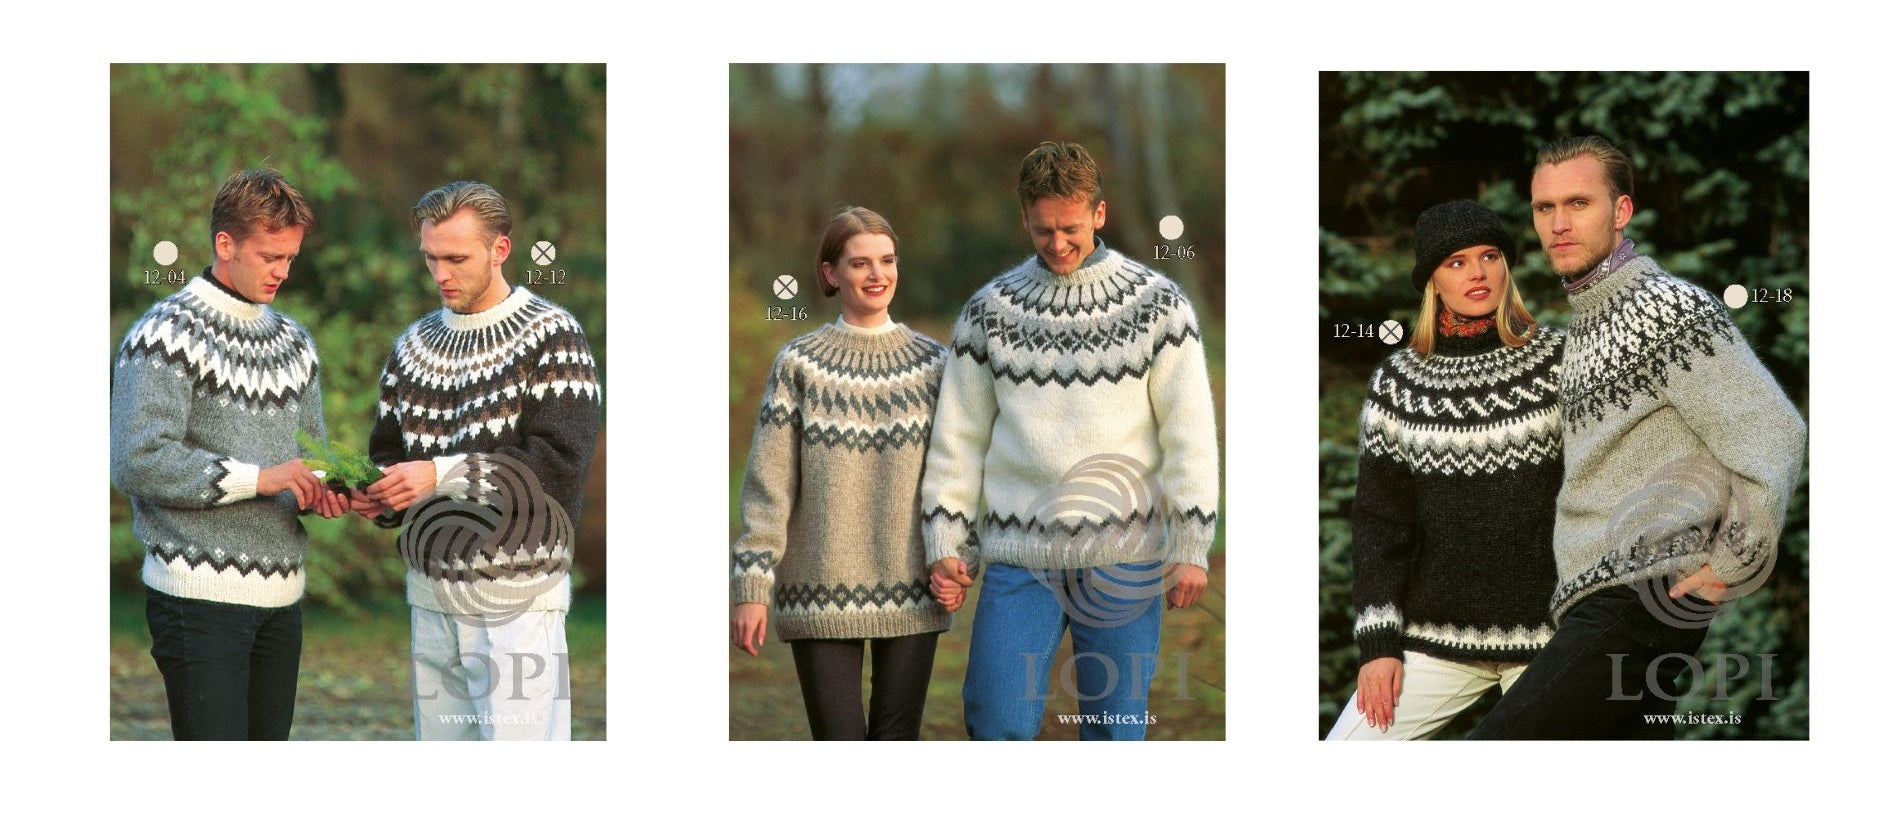 The Origins of the Authentic Icelandic Wool Sweater - Lopapeysa